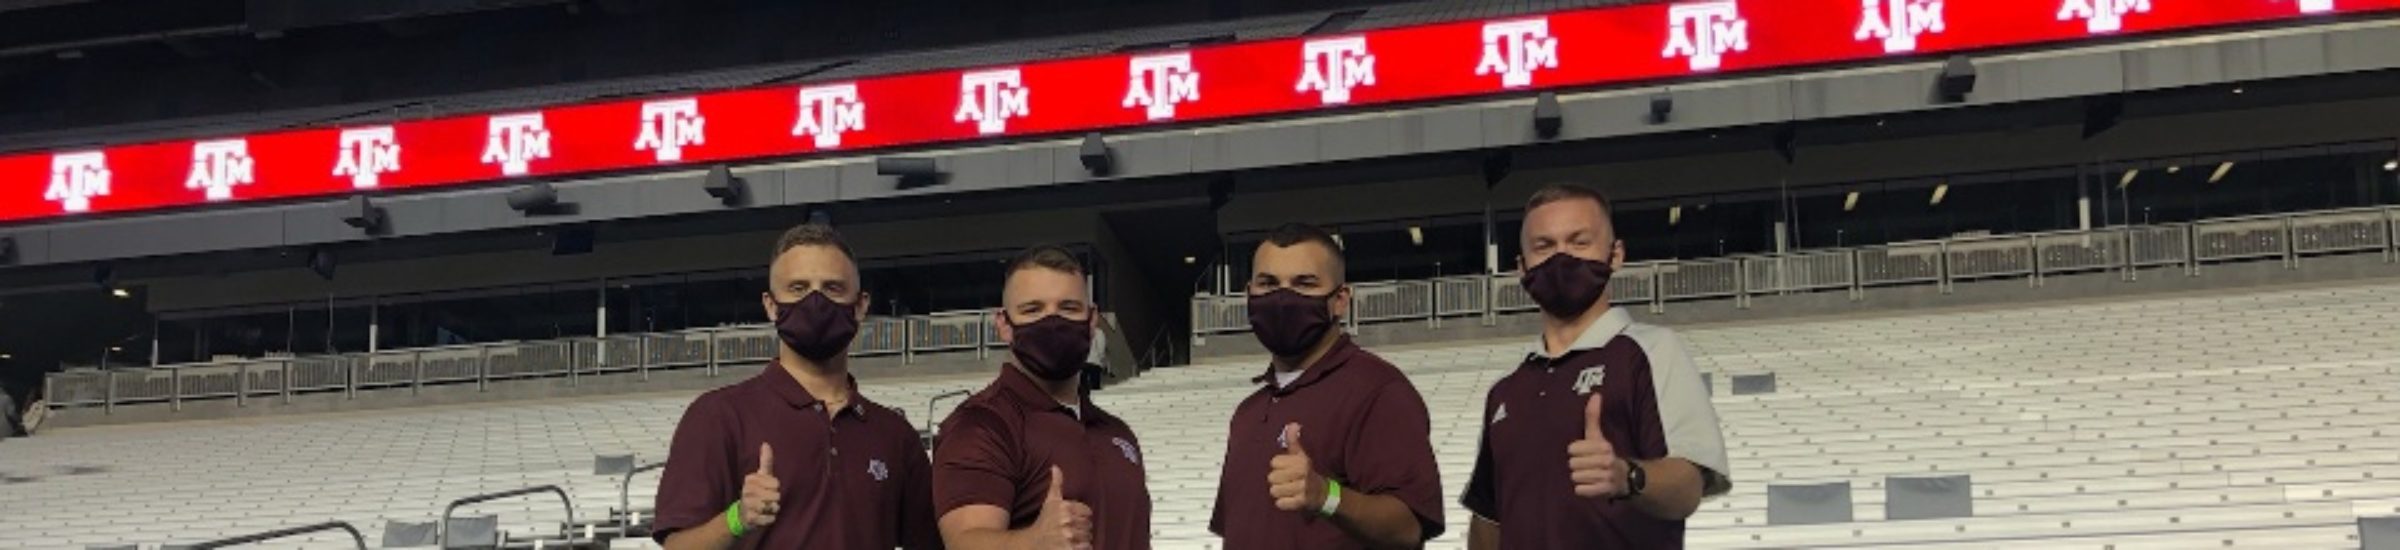 Texas A&M and Galveston Yell Leaders pose with thumbs up at Kyle Field after Midnight Yell on Oct. 30, 2020